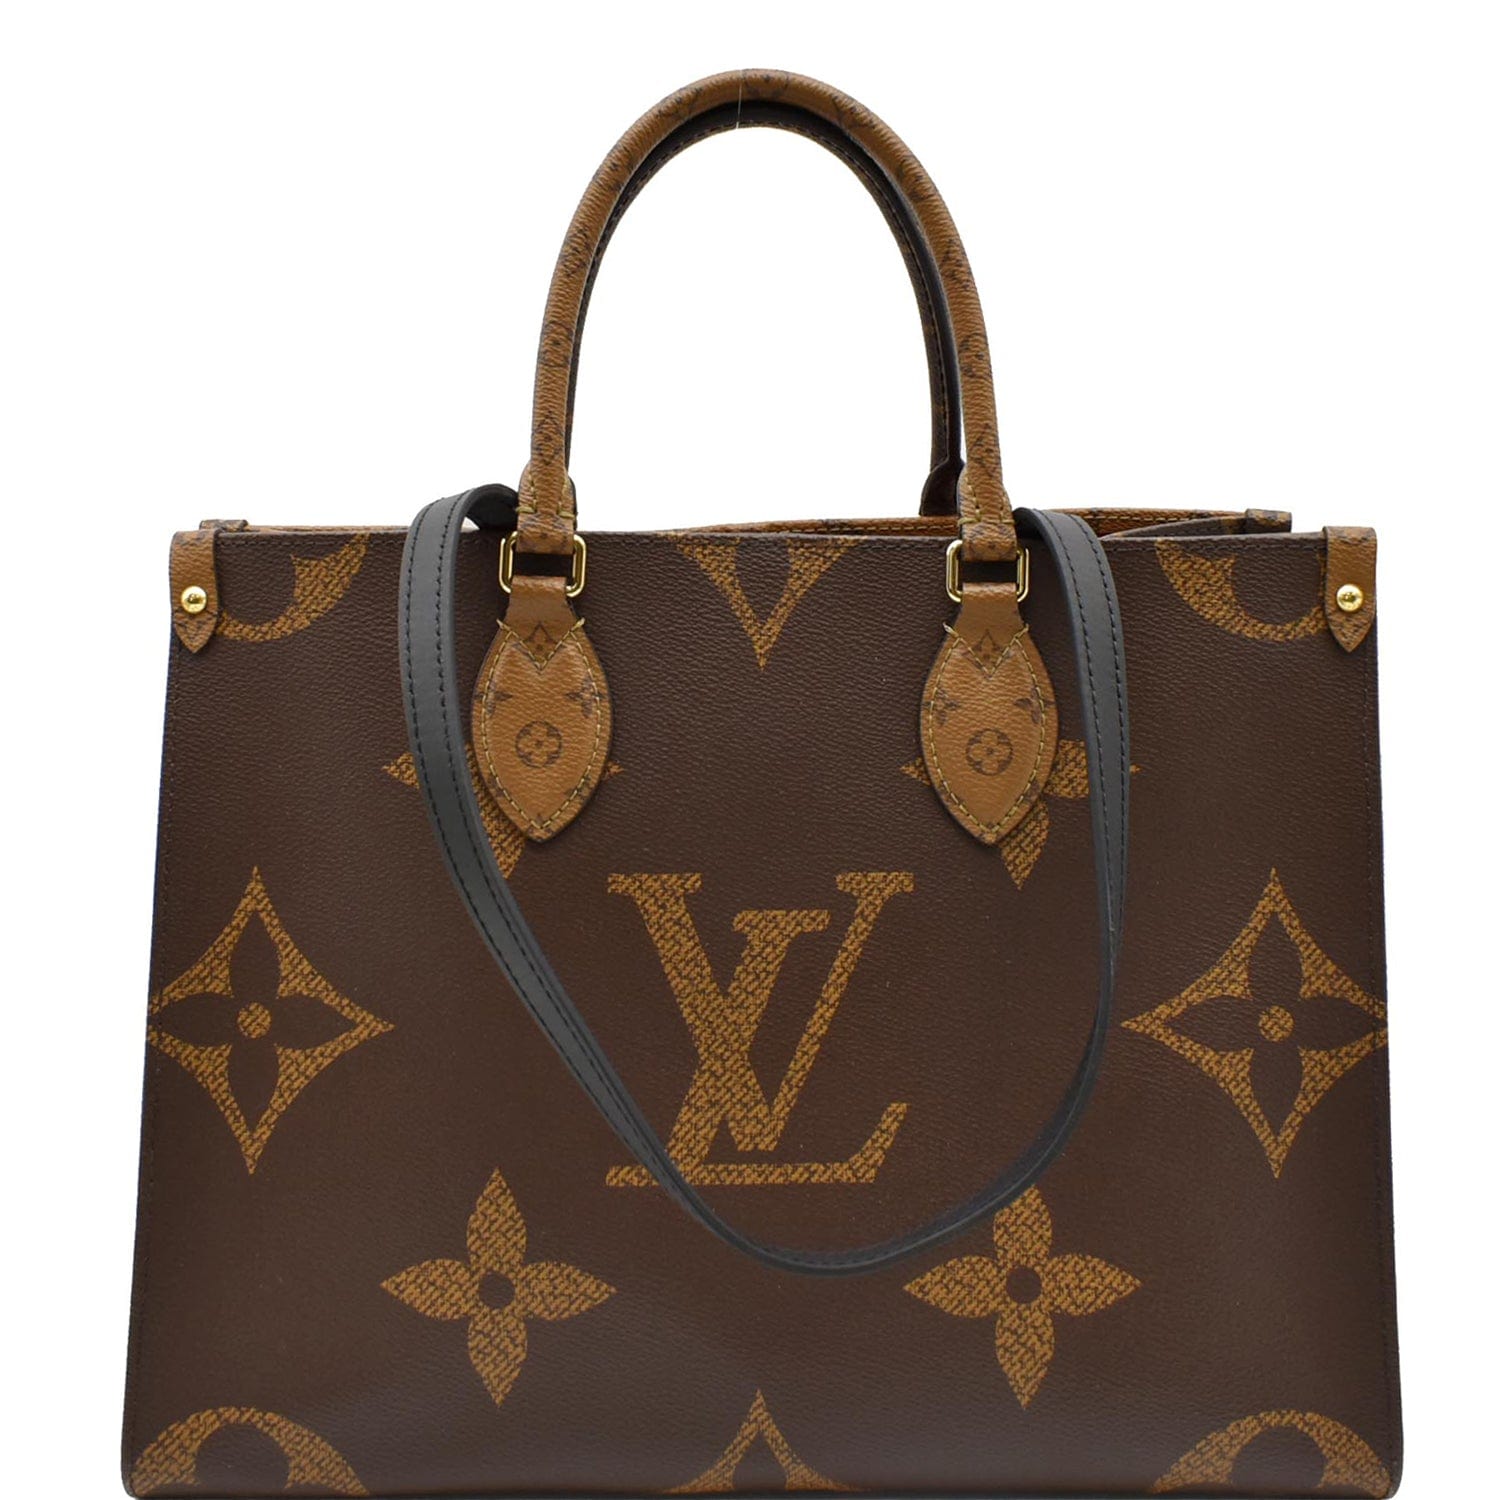 Louis Vuitton on The Go mm Coated Canvas Tote Bag,Brown